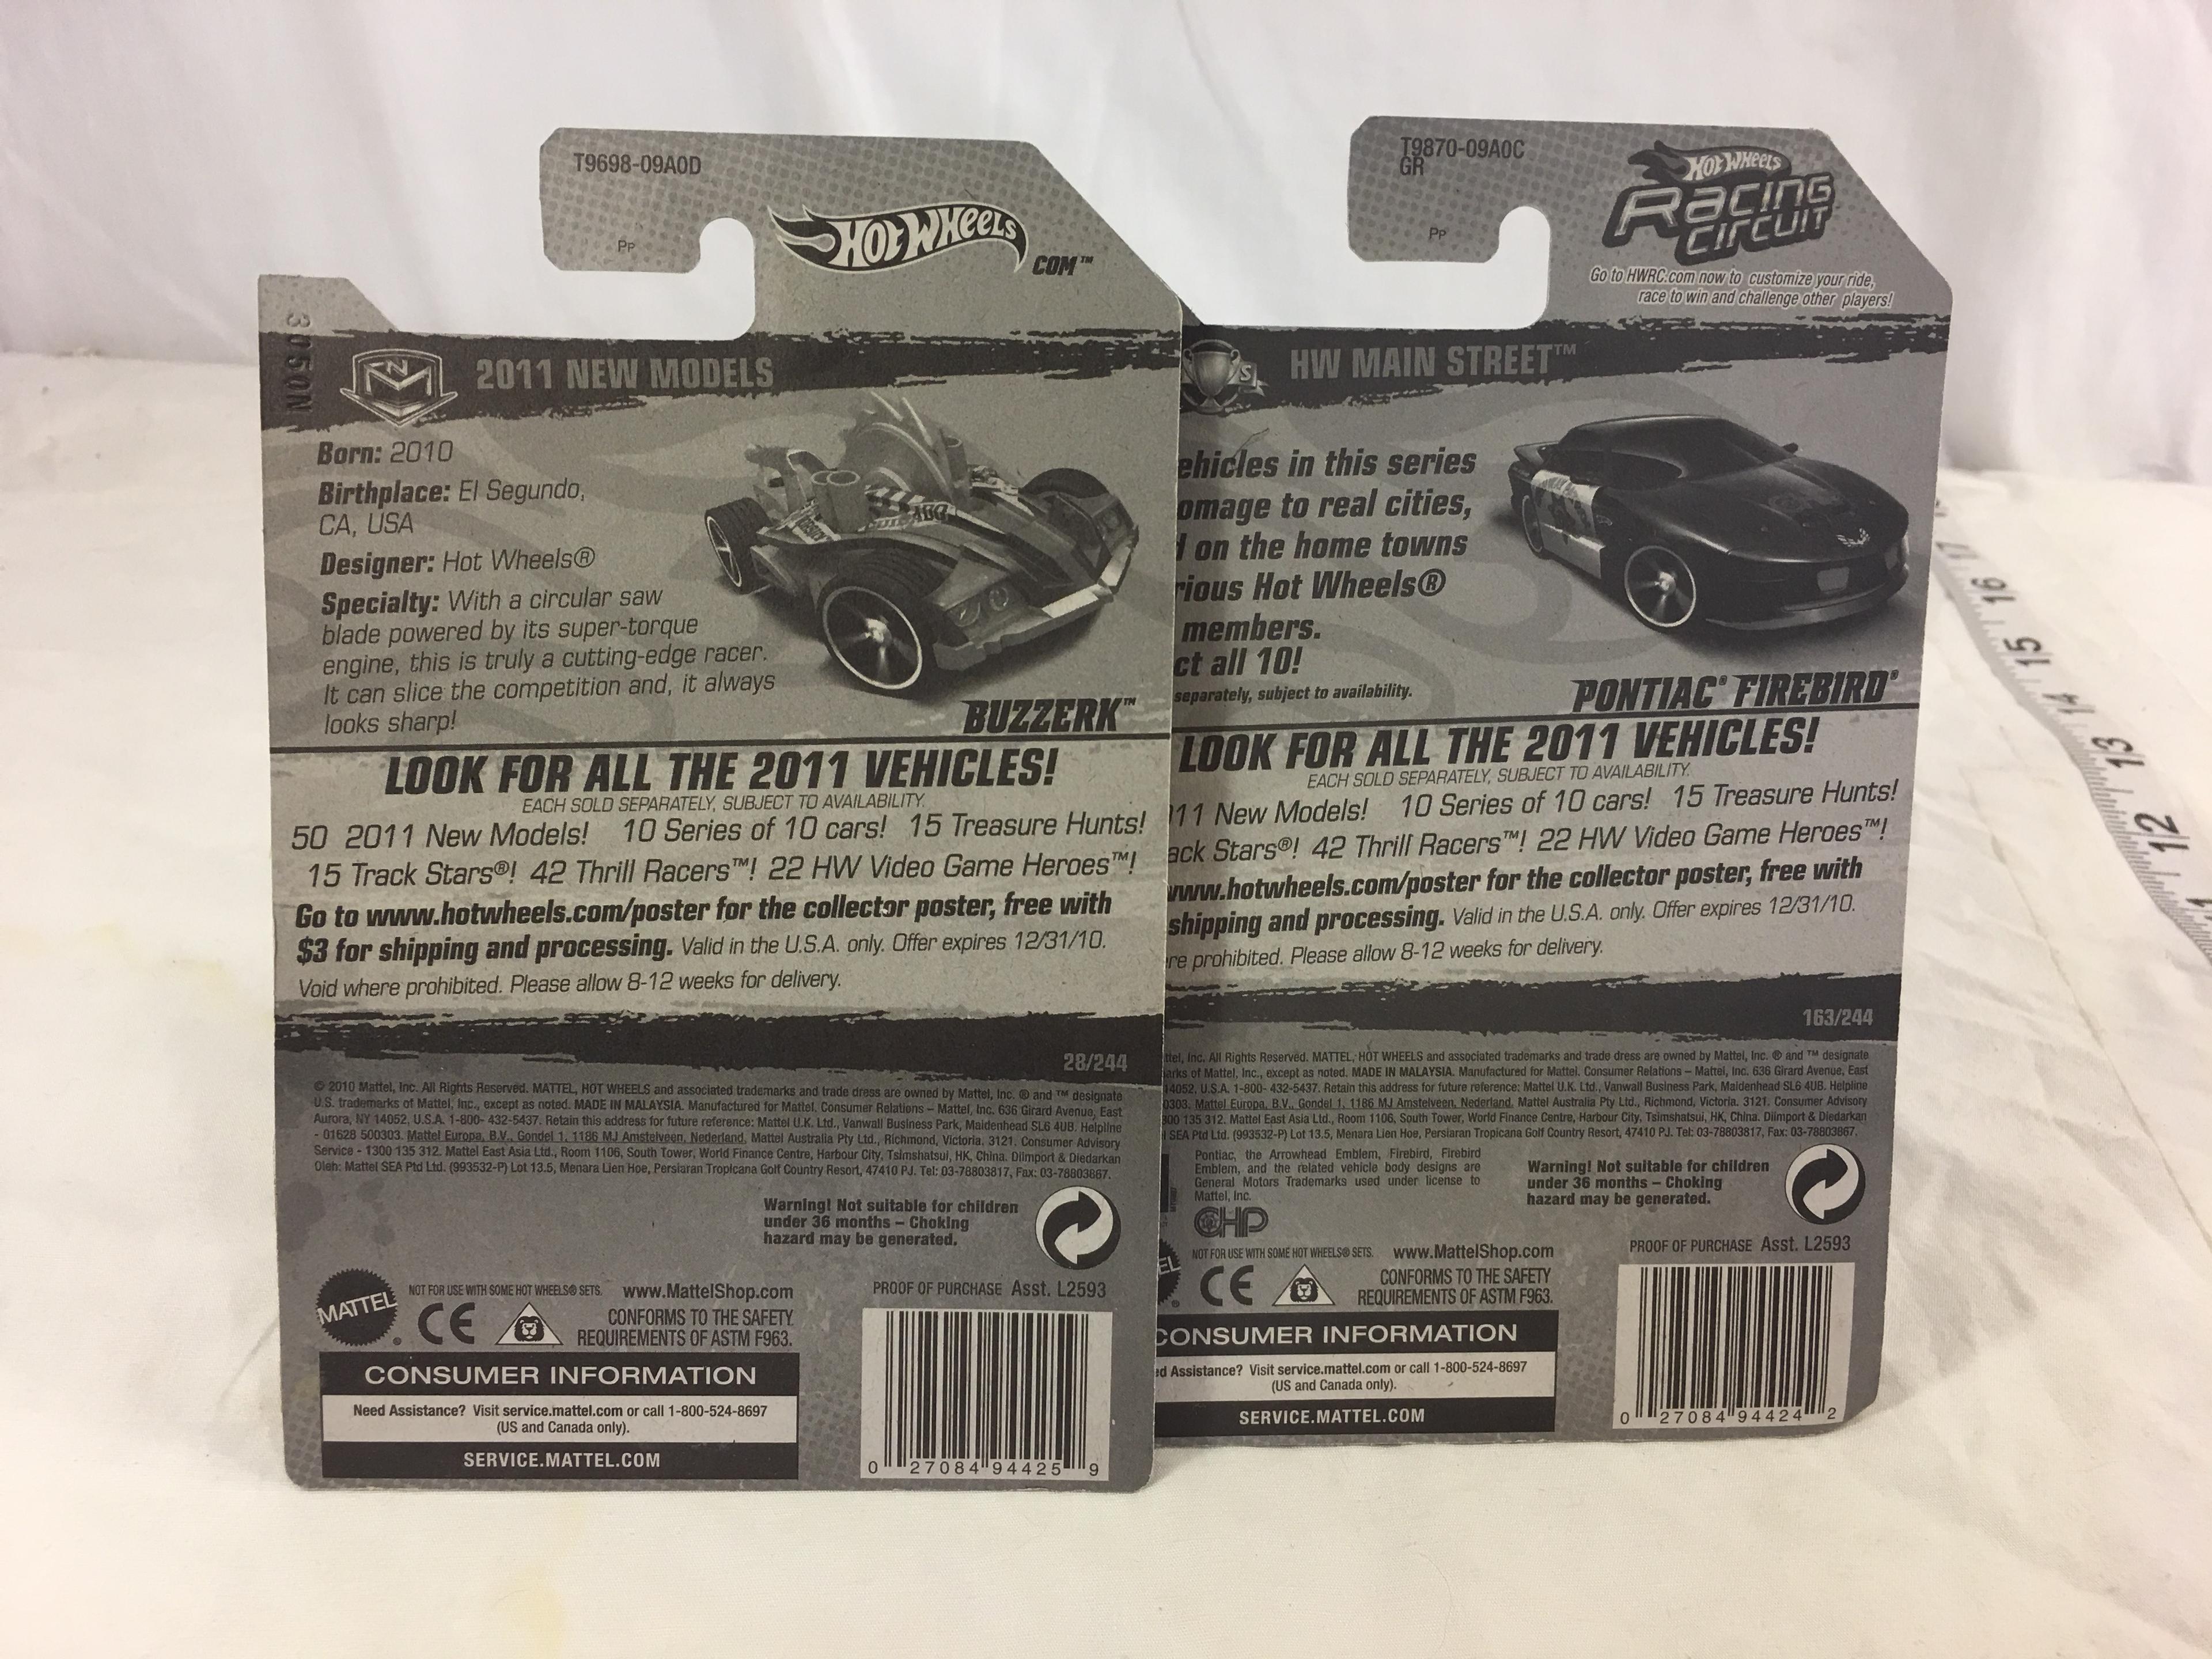 Lot of 2 Pieces Collector New in Package Hot wheels 1/64 Scale Die-Cast Metal & Plastic Parts